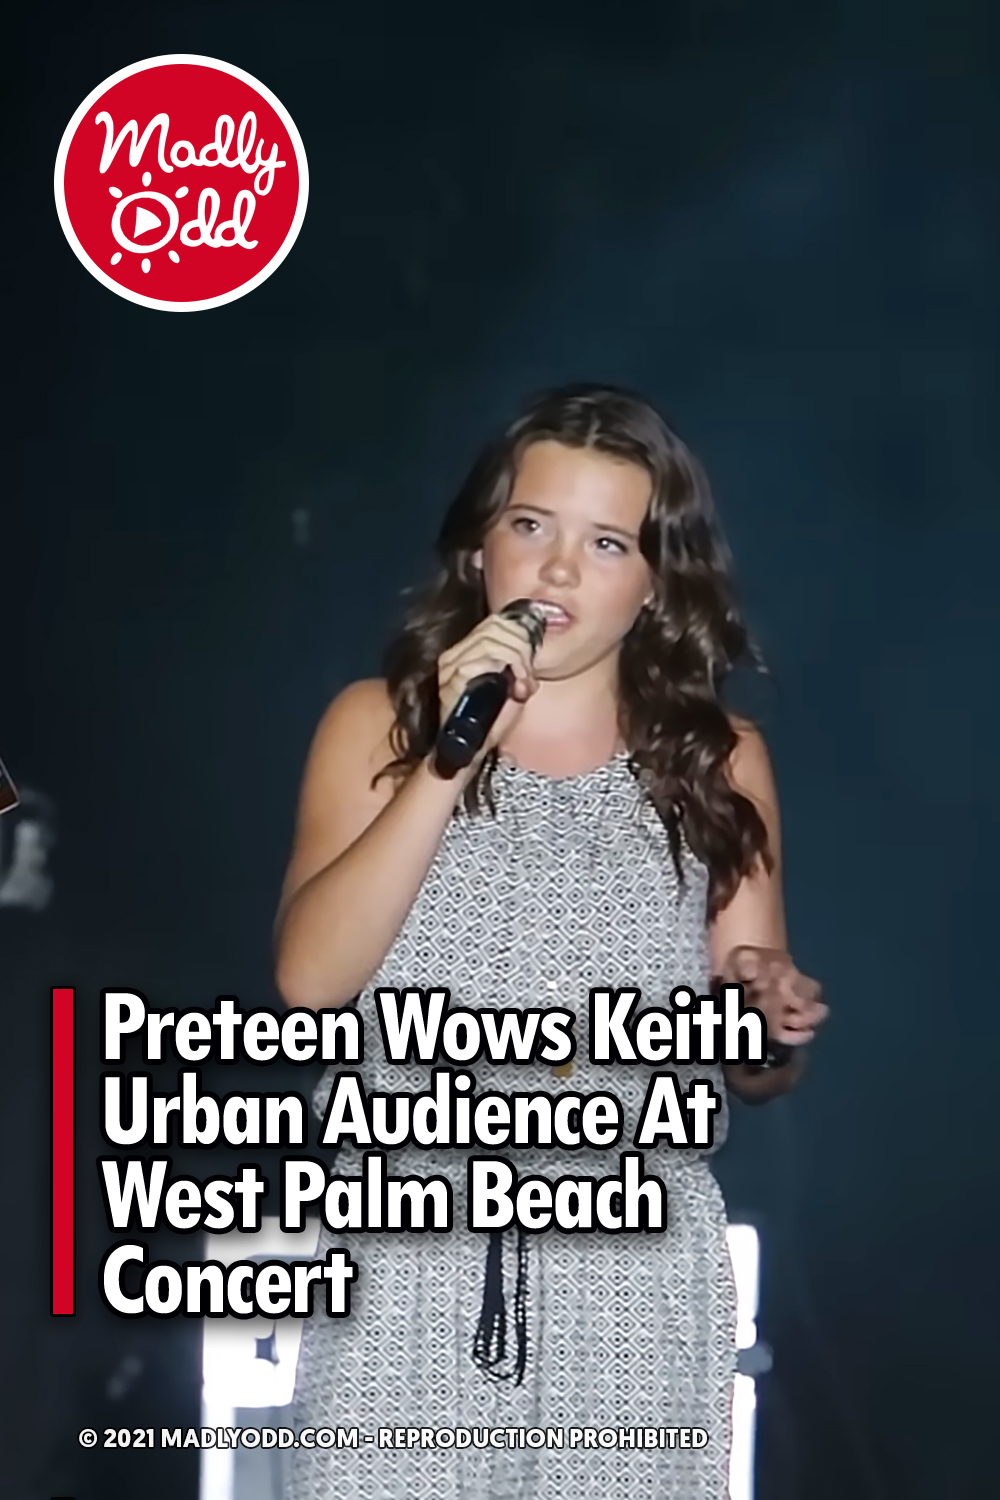 Preteen Wows Keith Urban Audience At West Palm Beach Concert